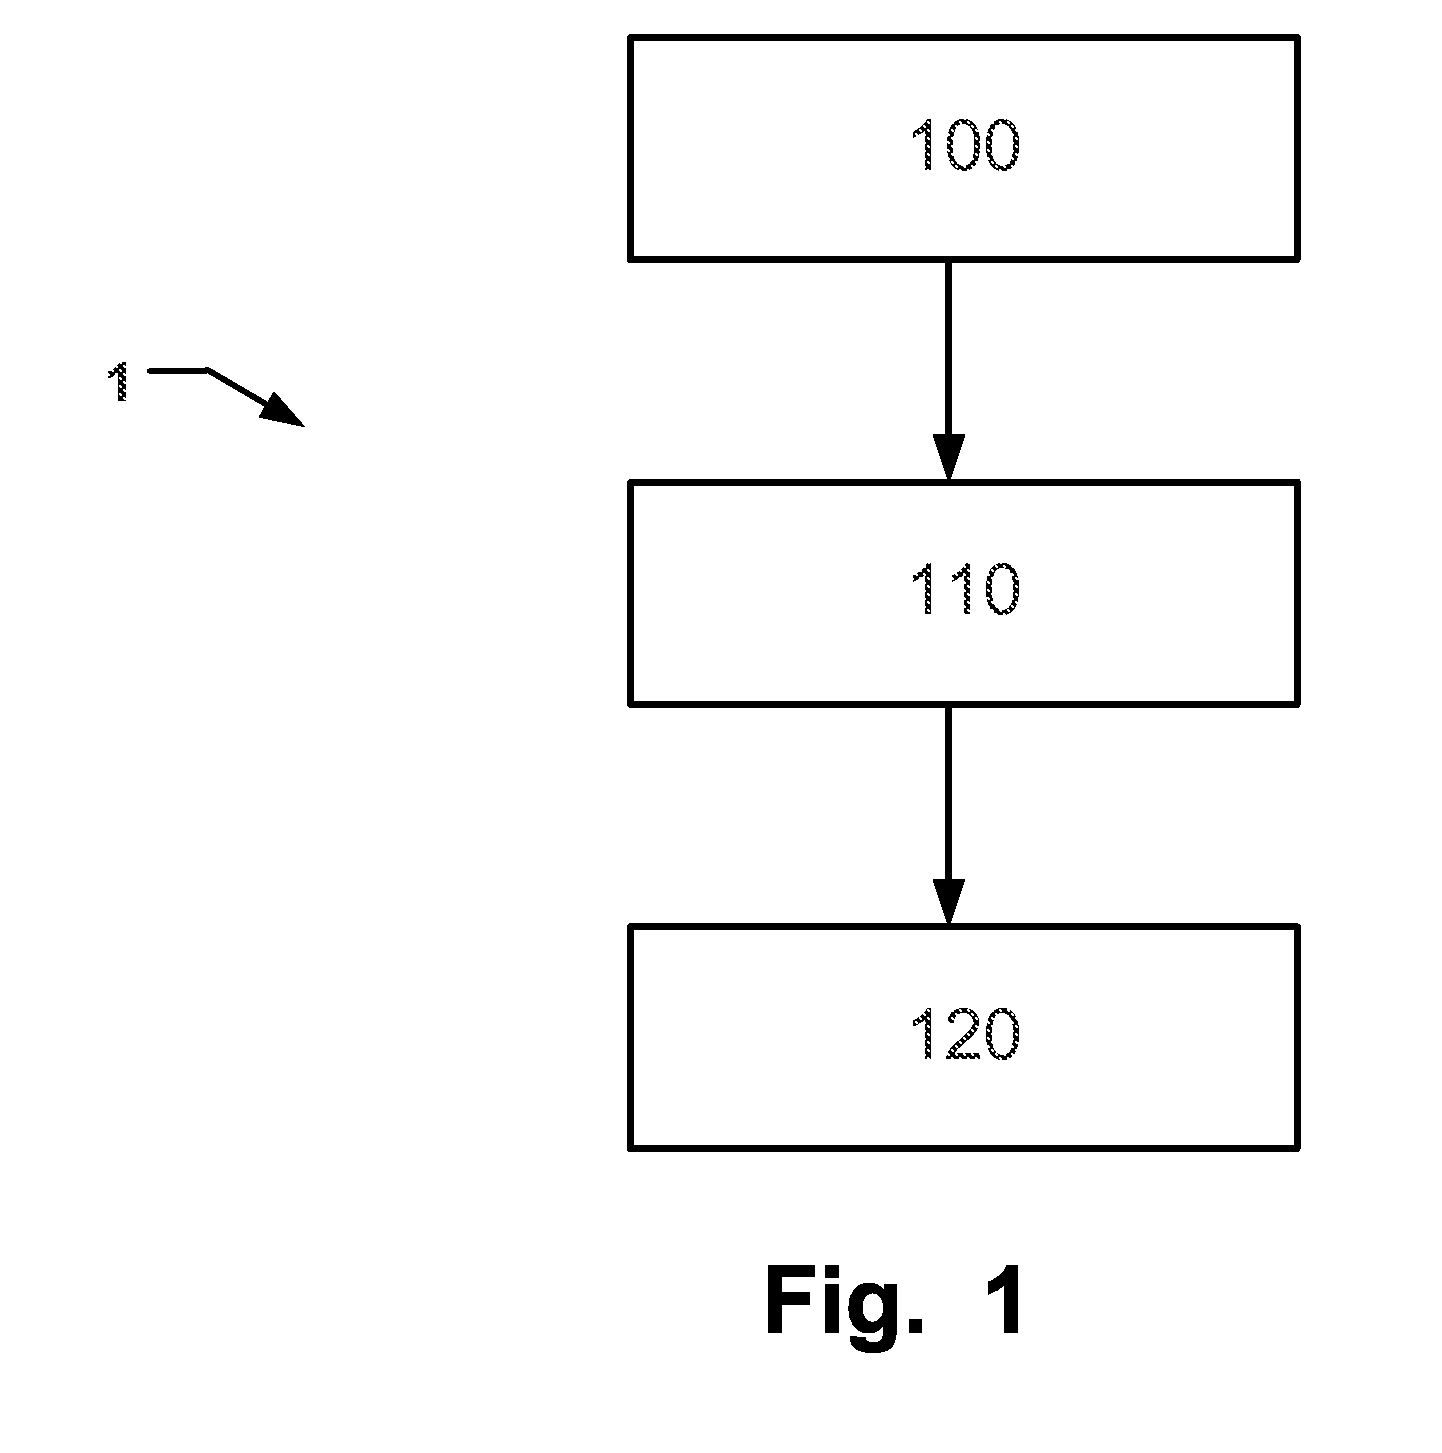 System and method for stabilizing a voice coil